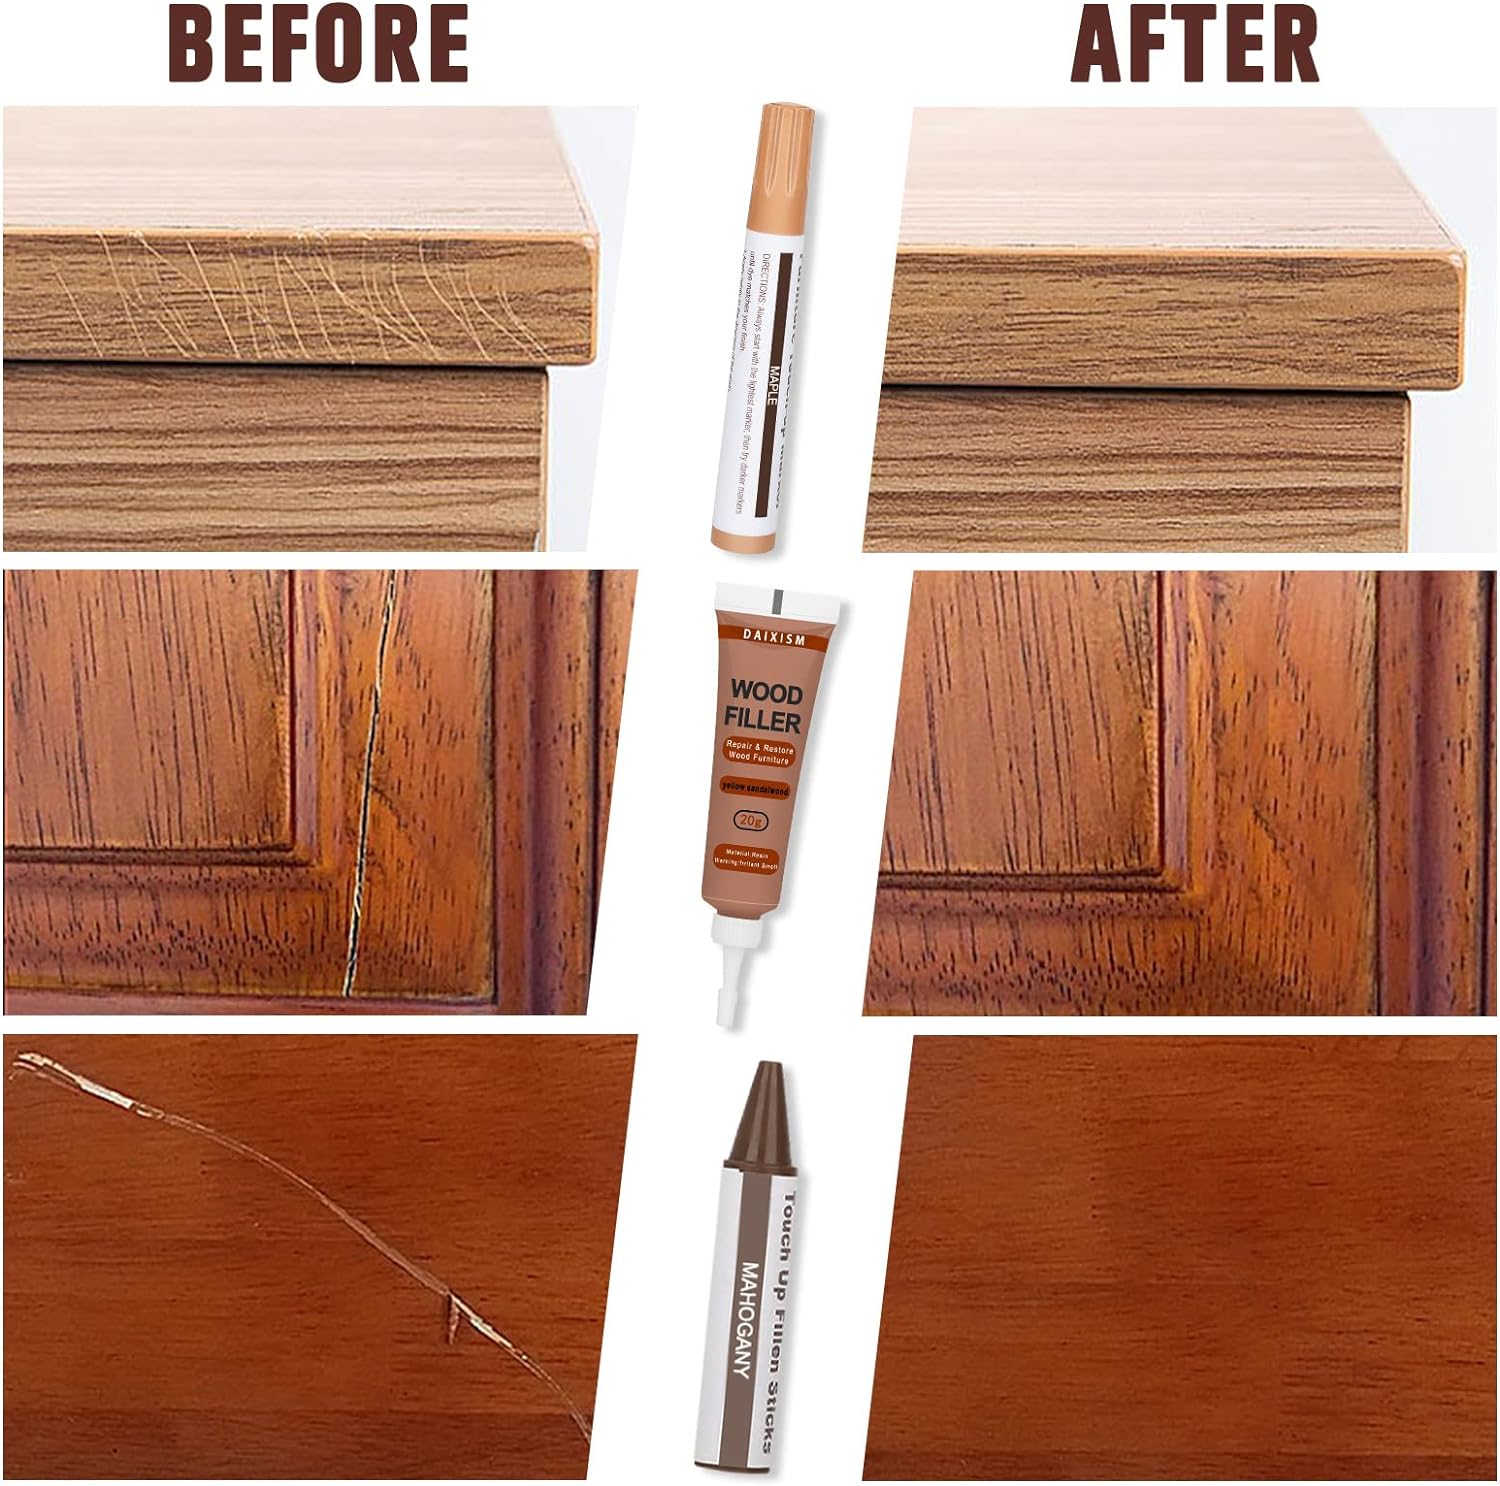 Furniture Repair Kit Wood Touch up Maker Restore Any Wood Furniture, Cover Surface Scratch for Wooden Floor Table, Filler Oak, Cabinet, Door, Veneer, Set of 39 : Health & Household